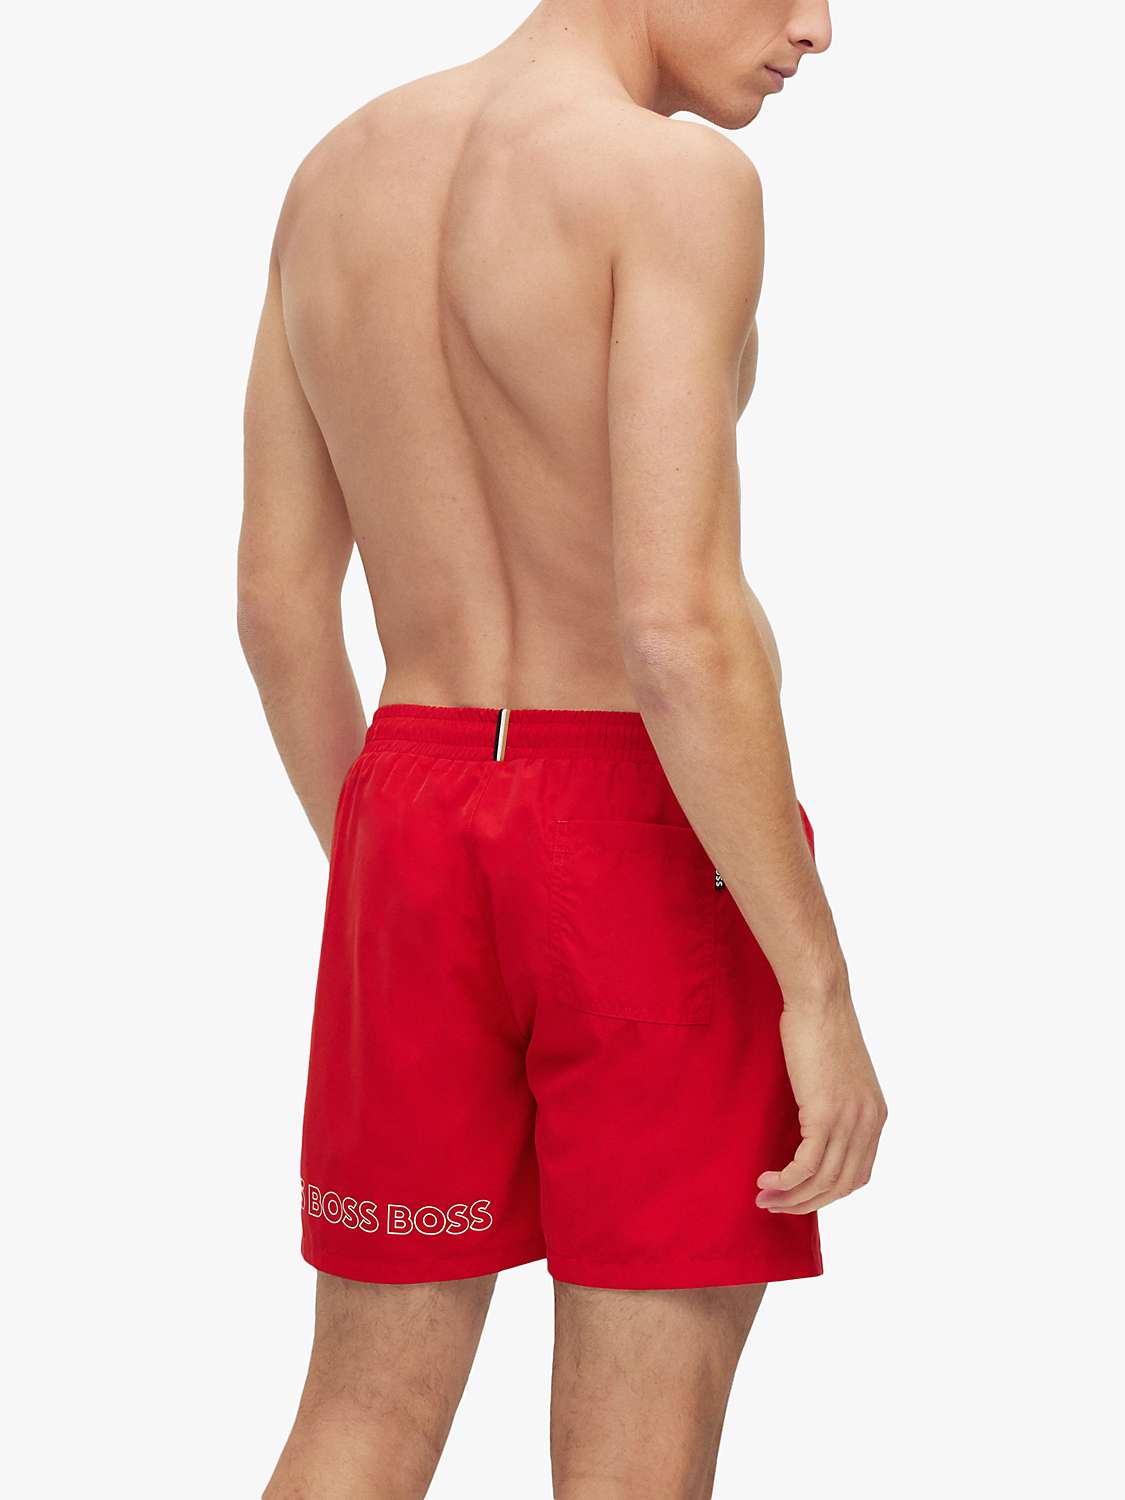 Buy BOSS Dolphin Swim Shorts, Bright Red Online at johnlewis.com